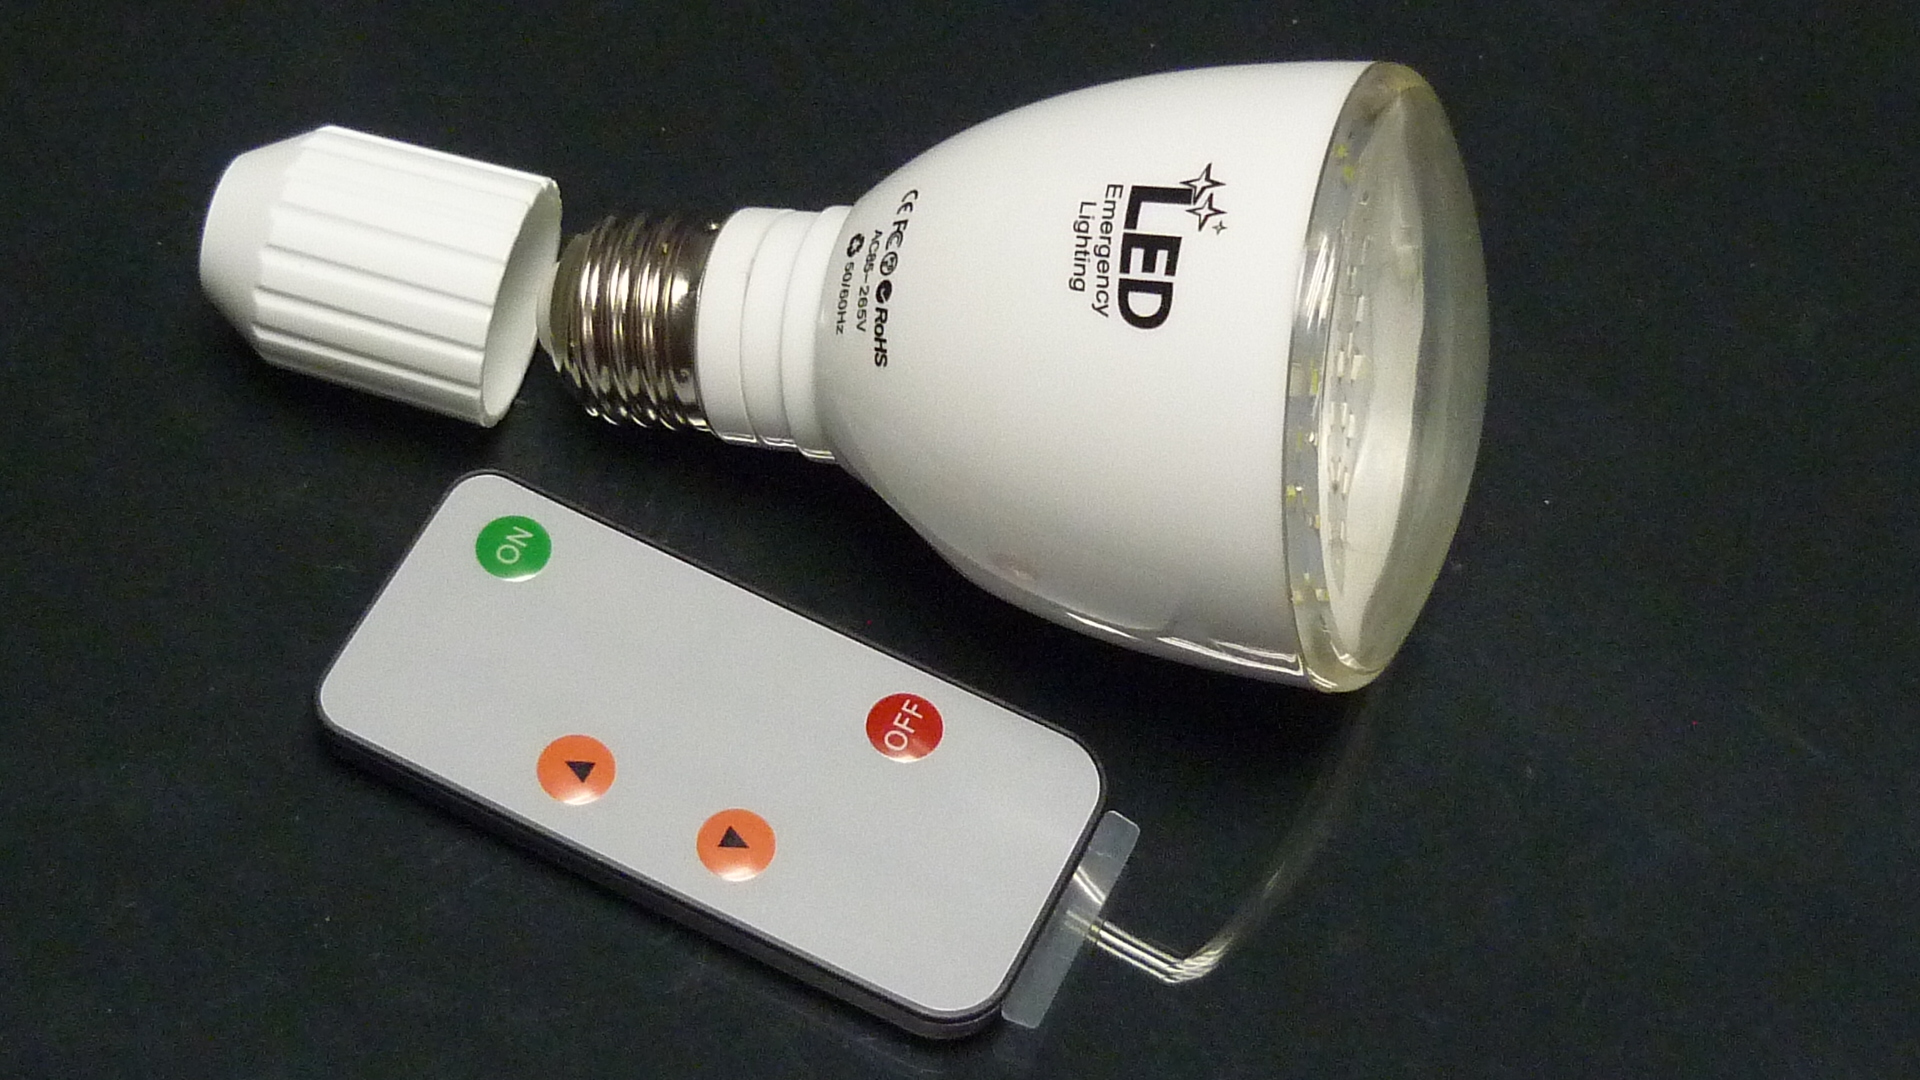 rechargeable remote multifunction led lighting Emergency bulb with torches Flashlight FCC